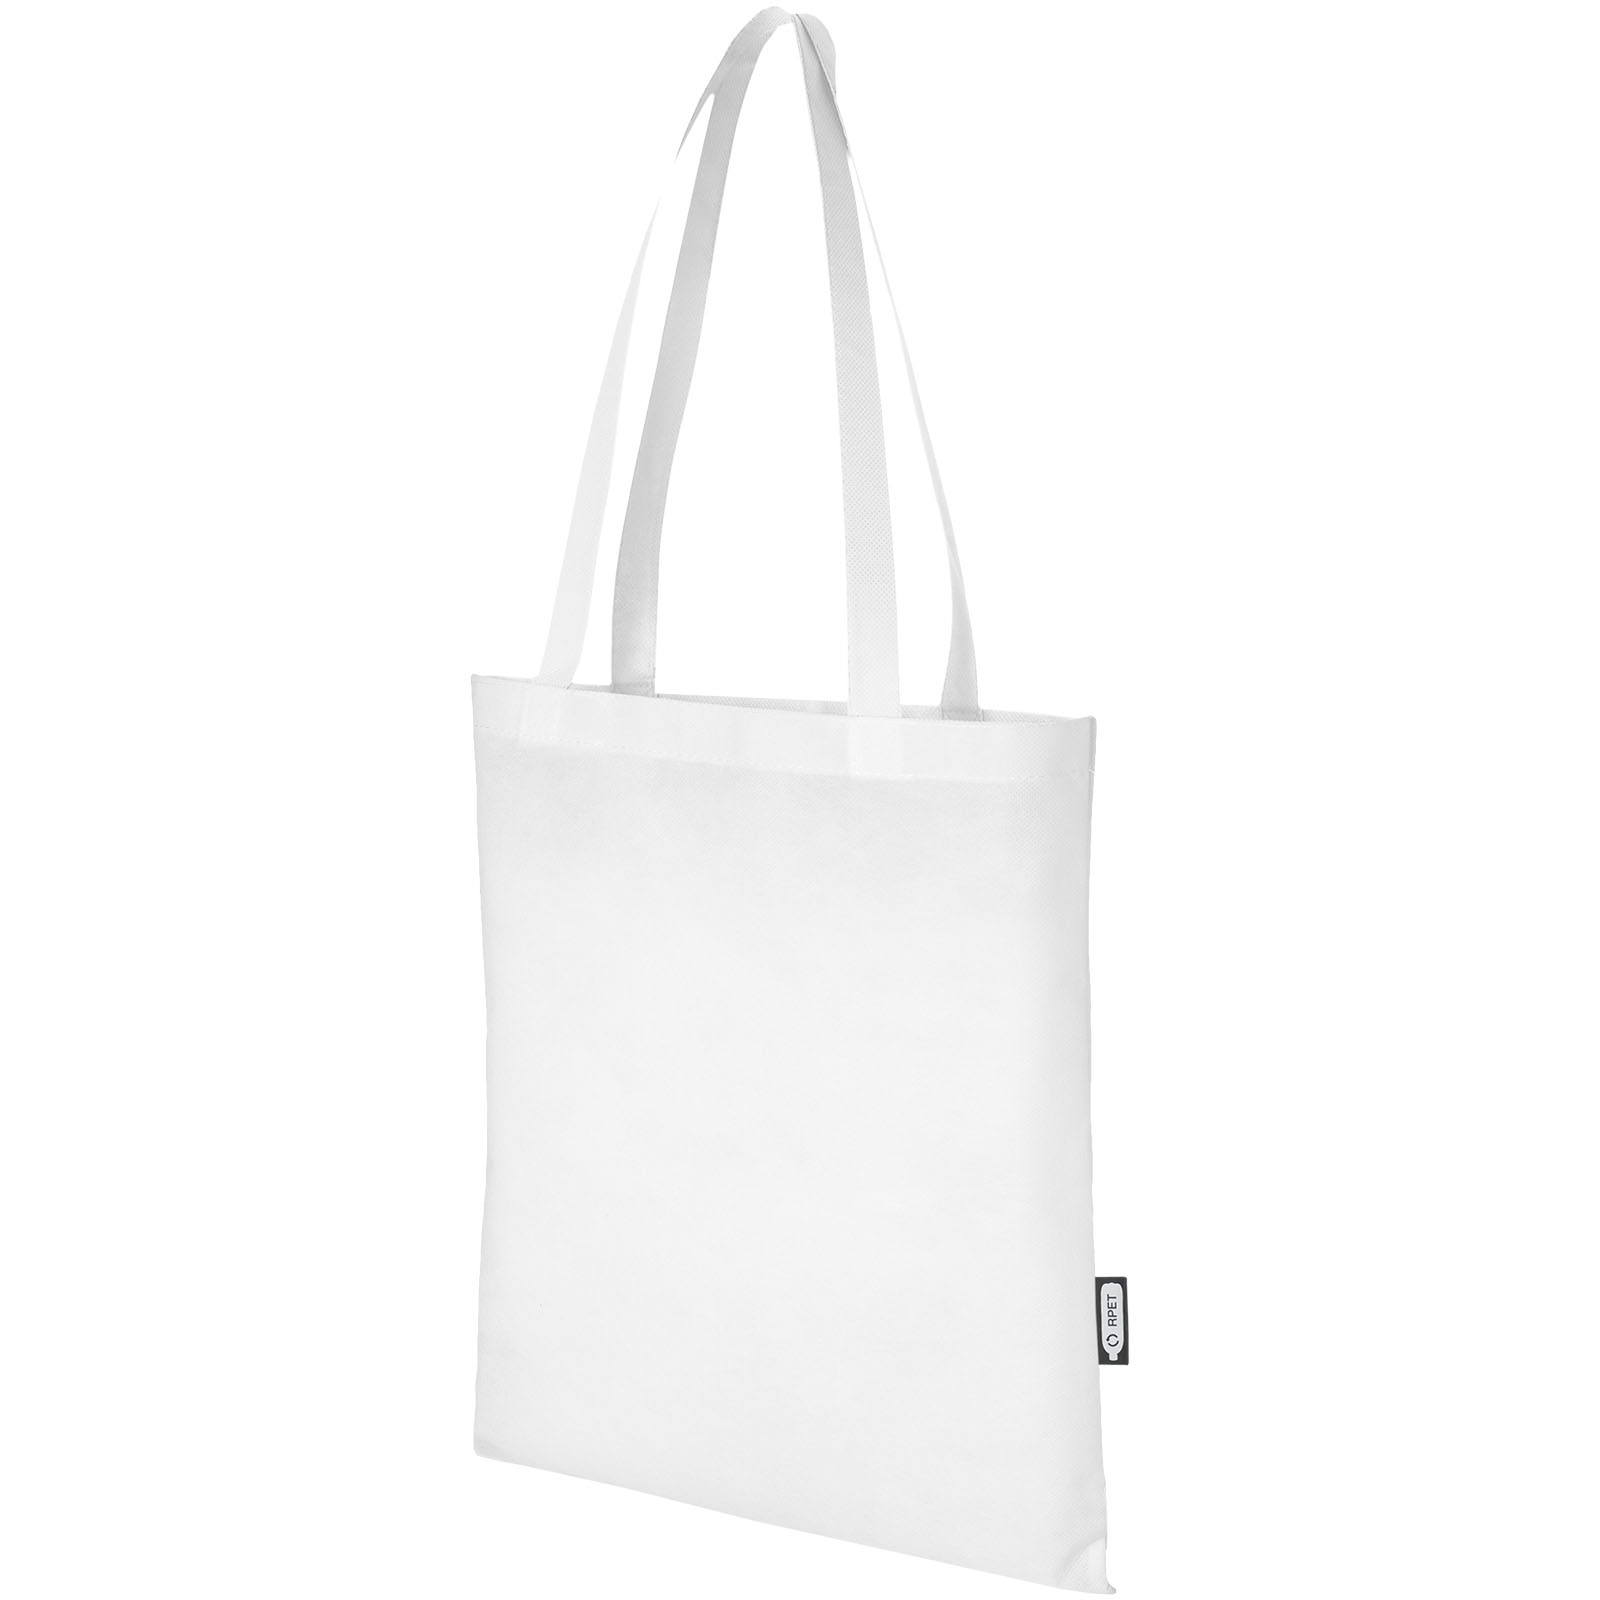 Bags - Zeus GRS recycled non-woven convention tote bag 6L